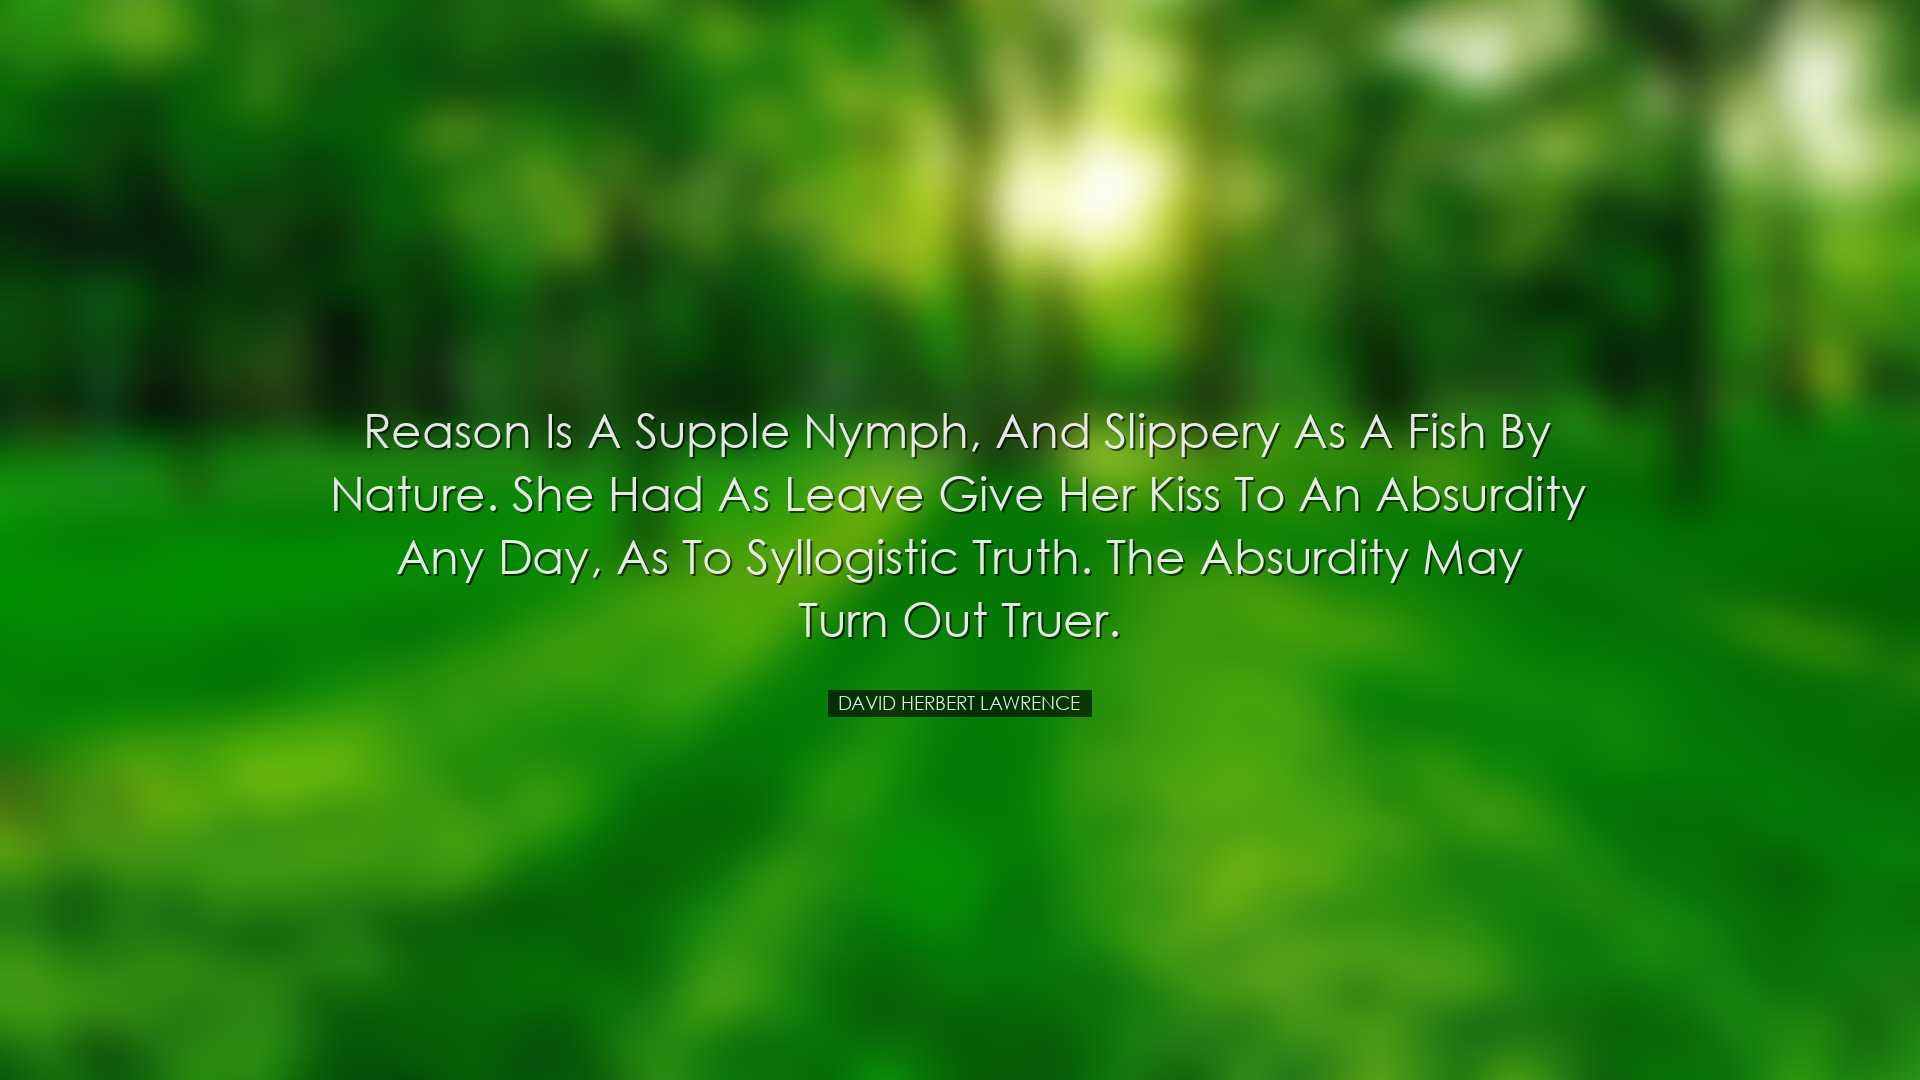 Reason is a supple nymph, and slippery as a fish by nature. She ha